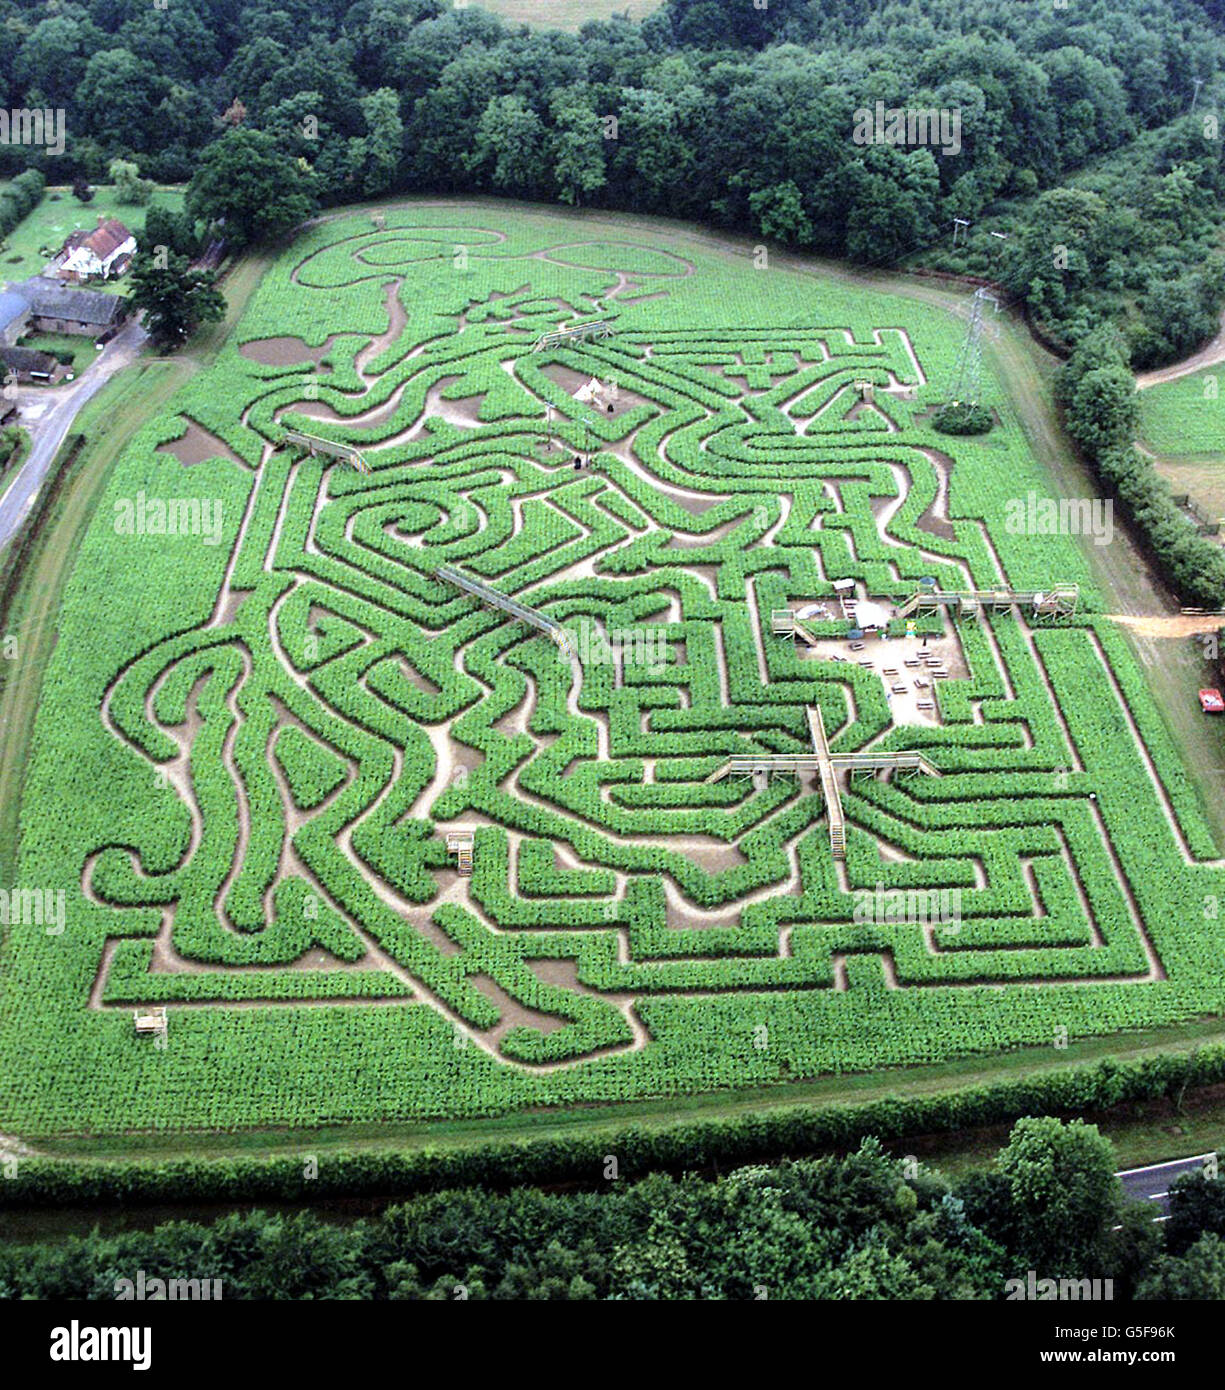 The Wild West Maize Maze at Turners Hill, West Sussex. The farm maze is one of the largest ever created and depicts a cowboy on a rearing horse carved into an eight-acre field of cattle maize. Stock Photo